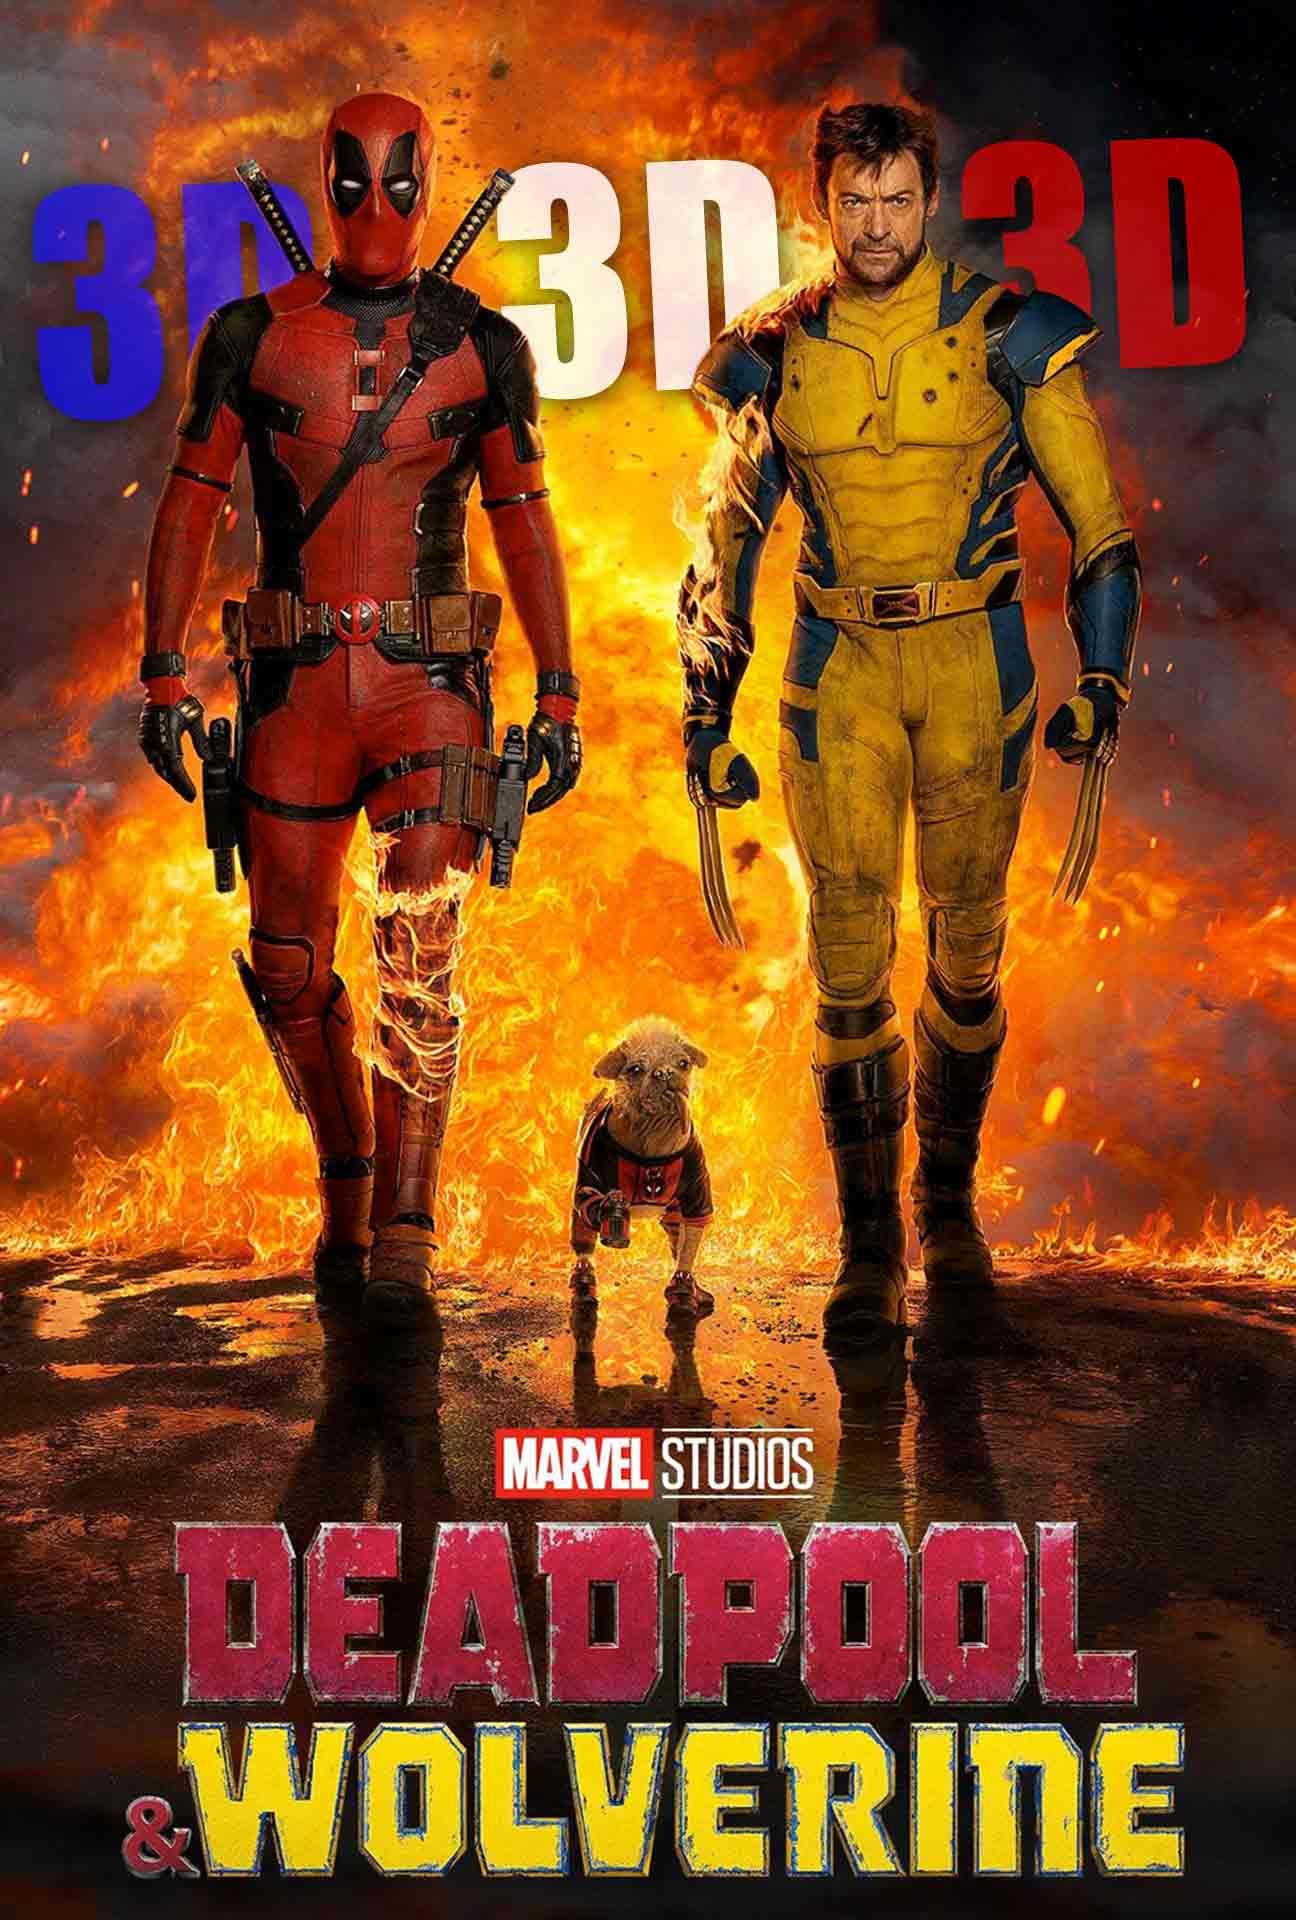 Movie Poster for Deadpool & Wolverine 3D